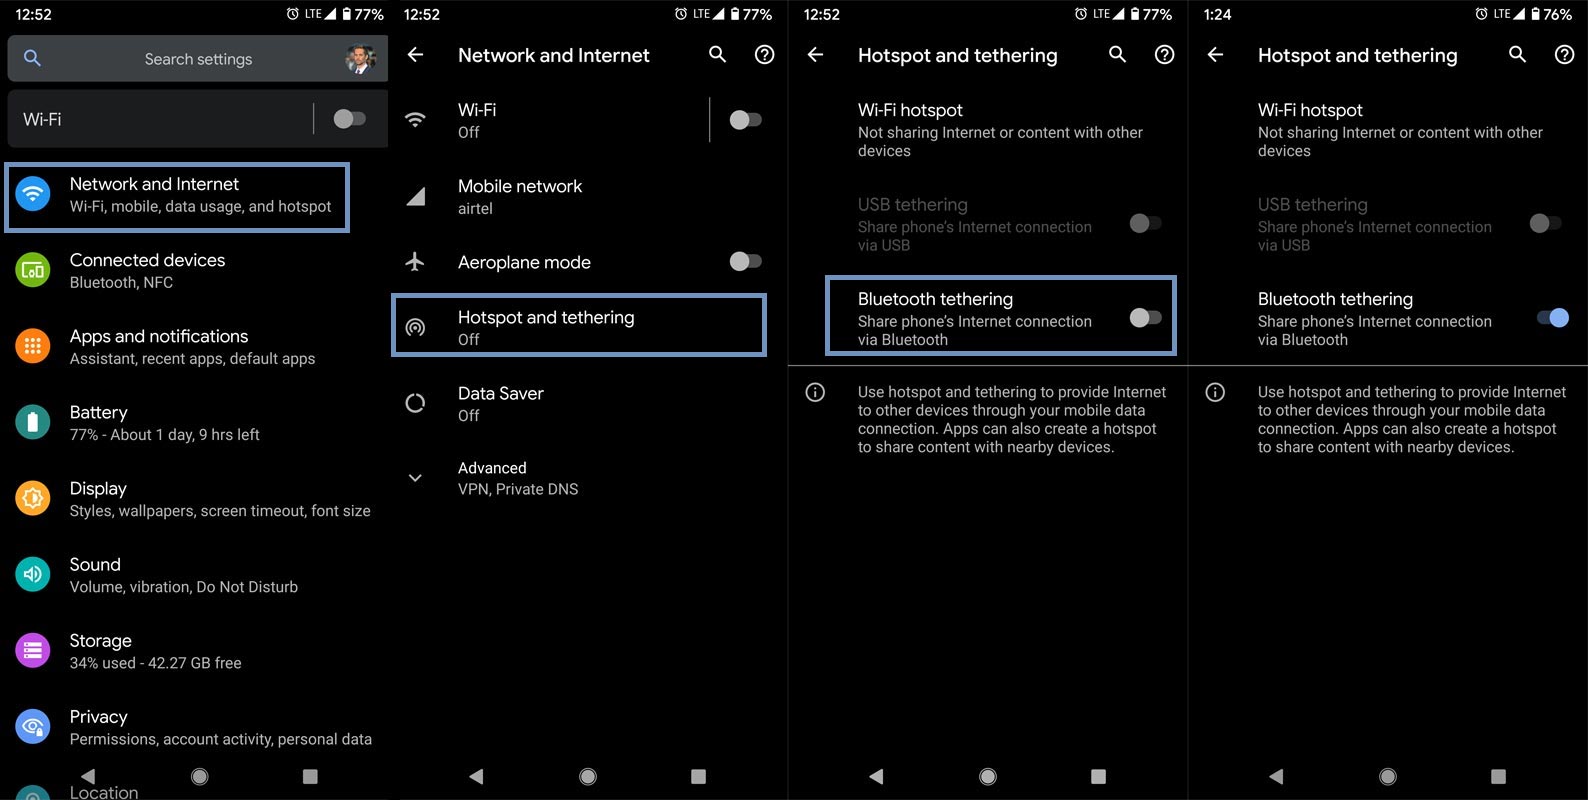 Enable Bluetooth Tetherig in Android